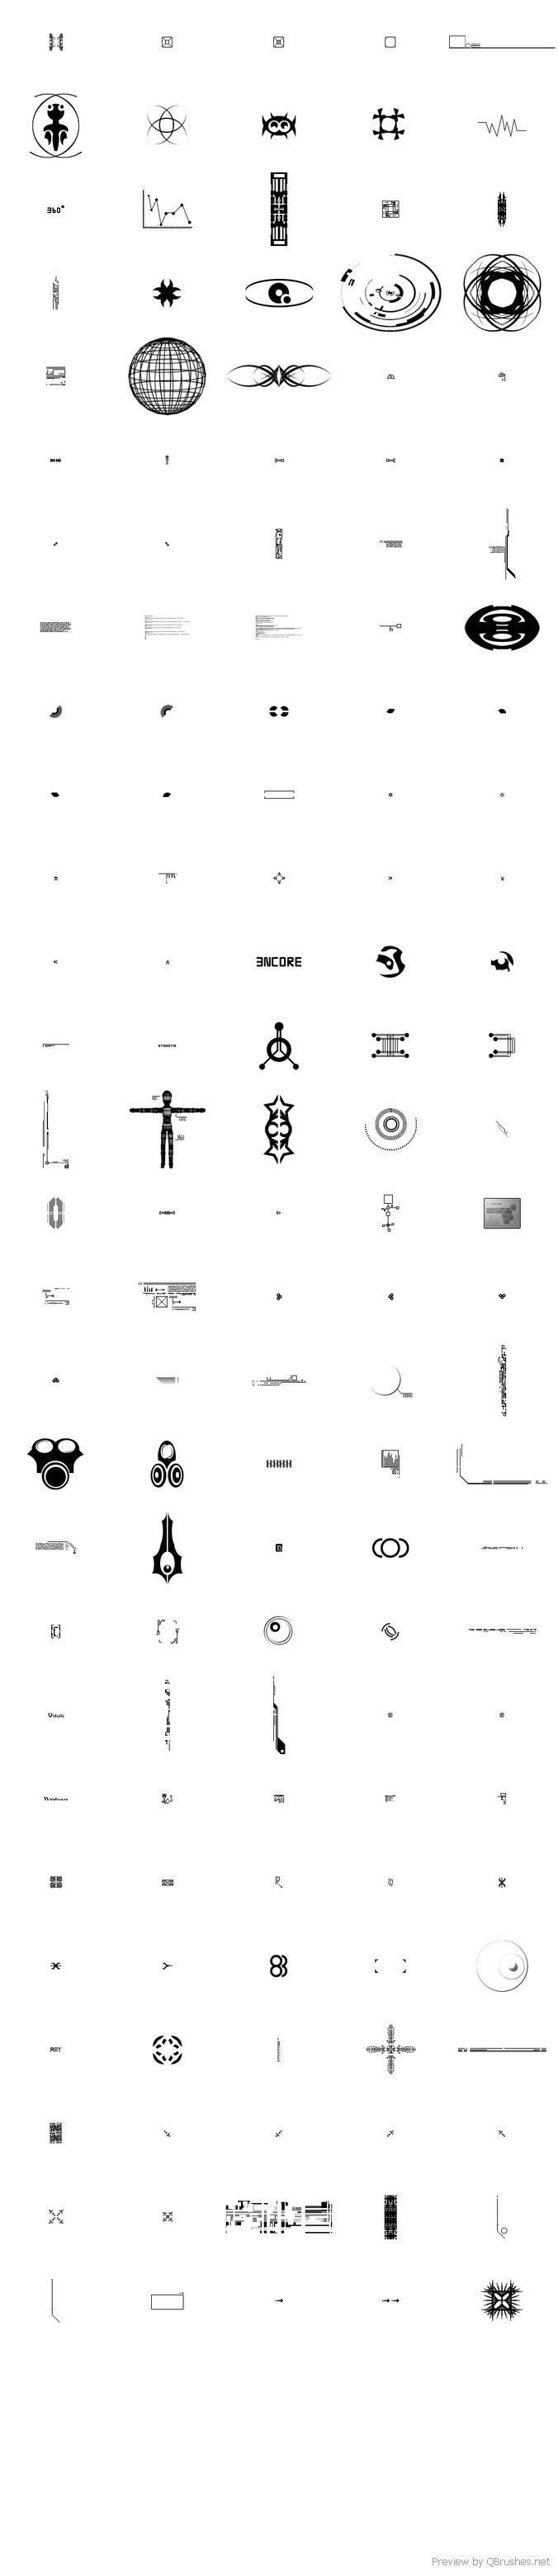 200 Tech brushes